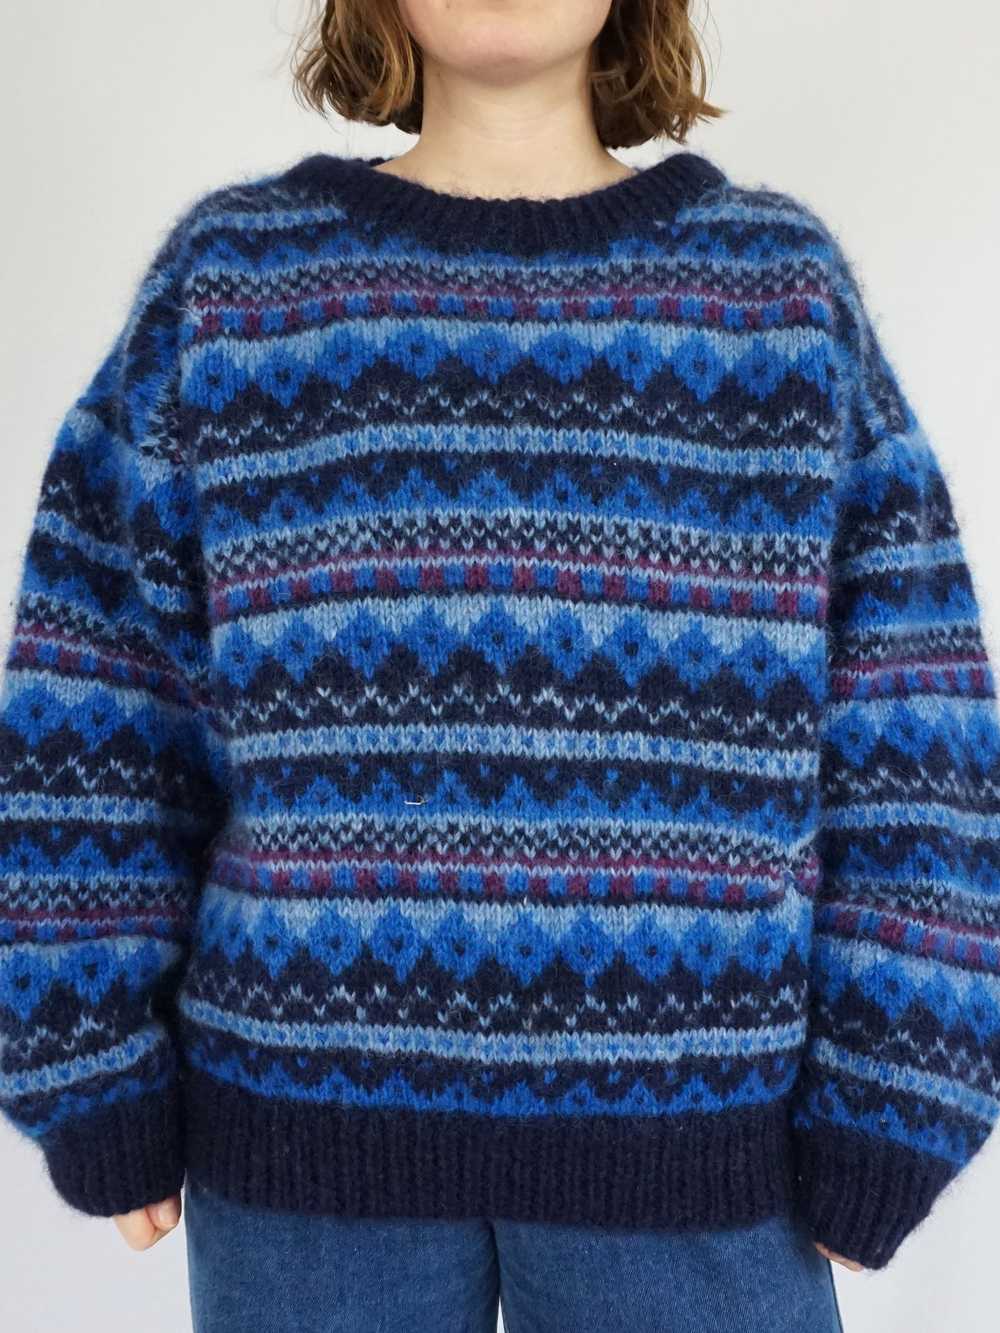 Chunky Wool Patterned Jumper - XL - image 2